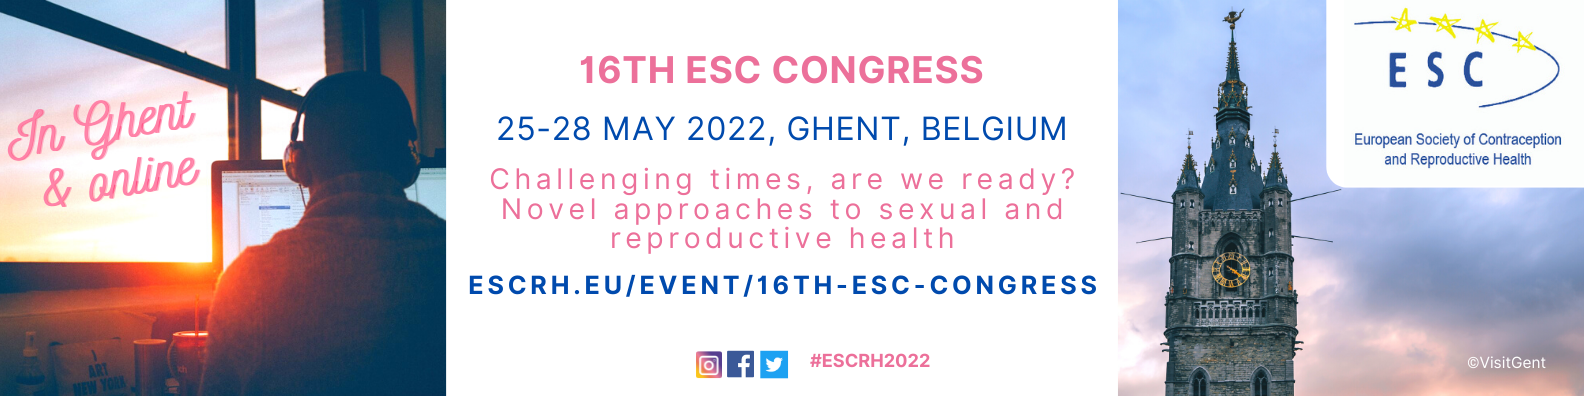 16th Congress of the European Society of Contraception and Reproductive Health, Online Event